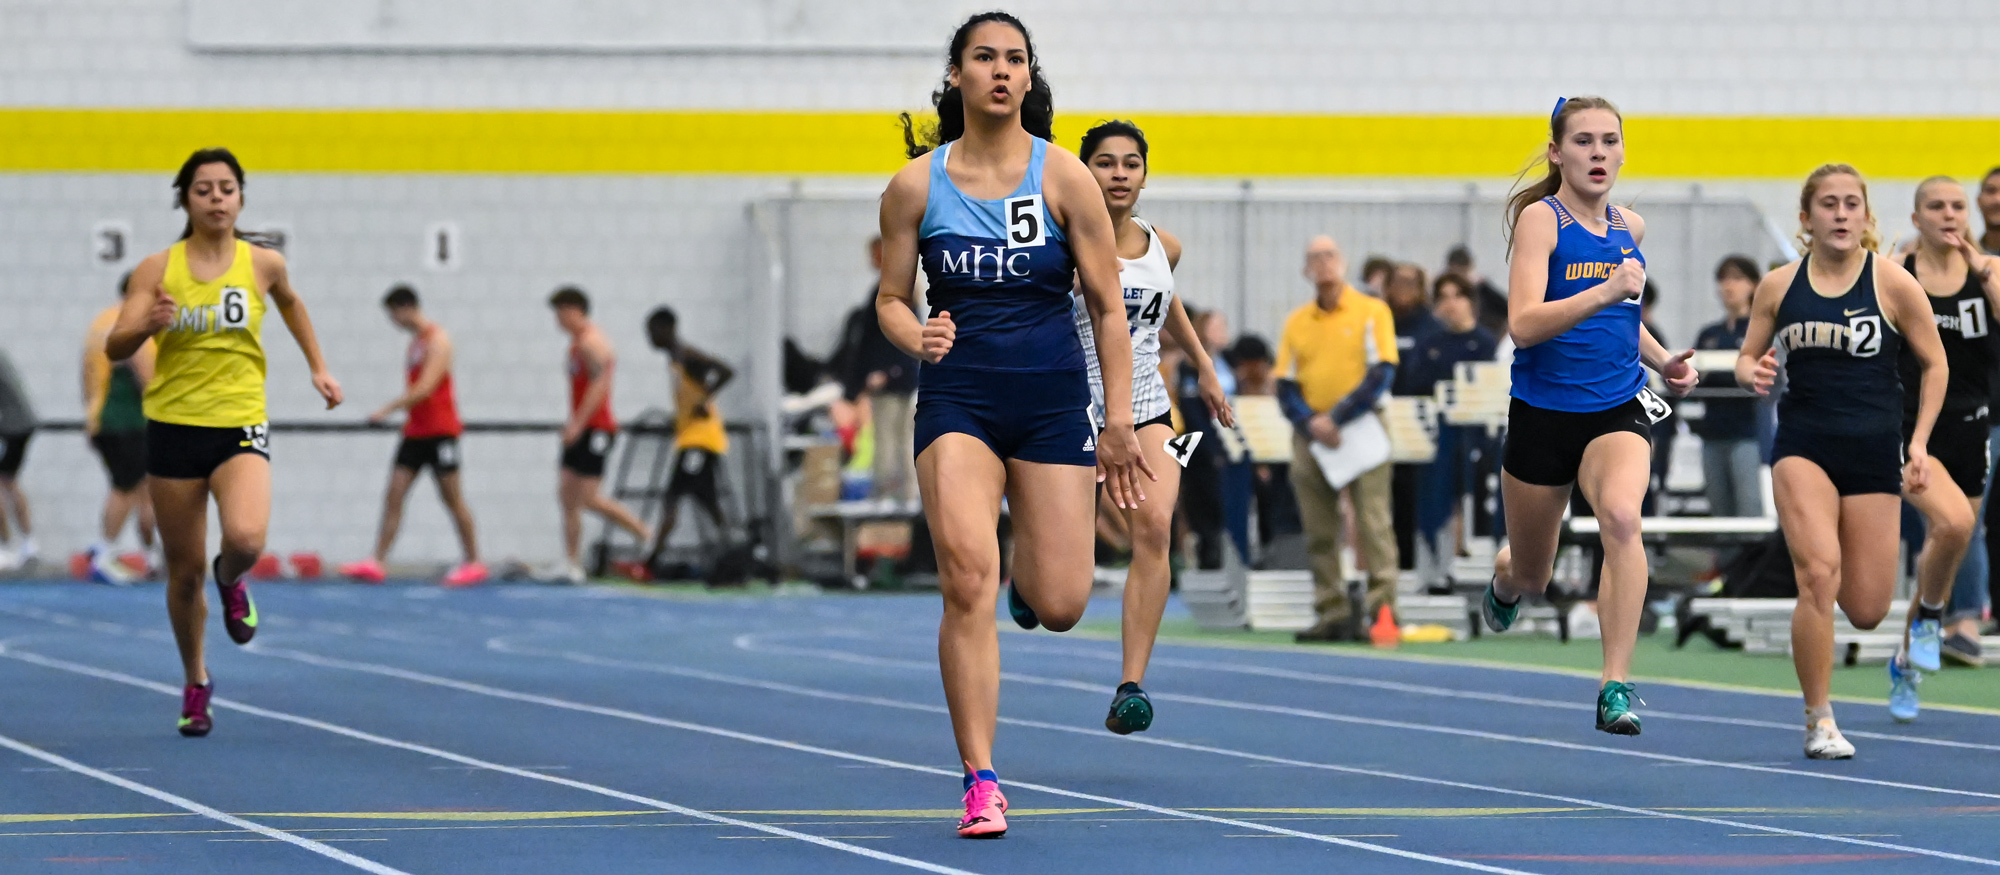 Aria Mallare moved into second place on Mount Holyoke's all-time performance list in the 60-meter dash, one of her three top-three performances at the Mary Grinaker Invitational at Smith College on Dec. 2, 2023. (Bob Blanchard/RJB Sports)